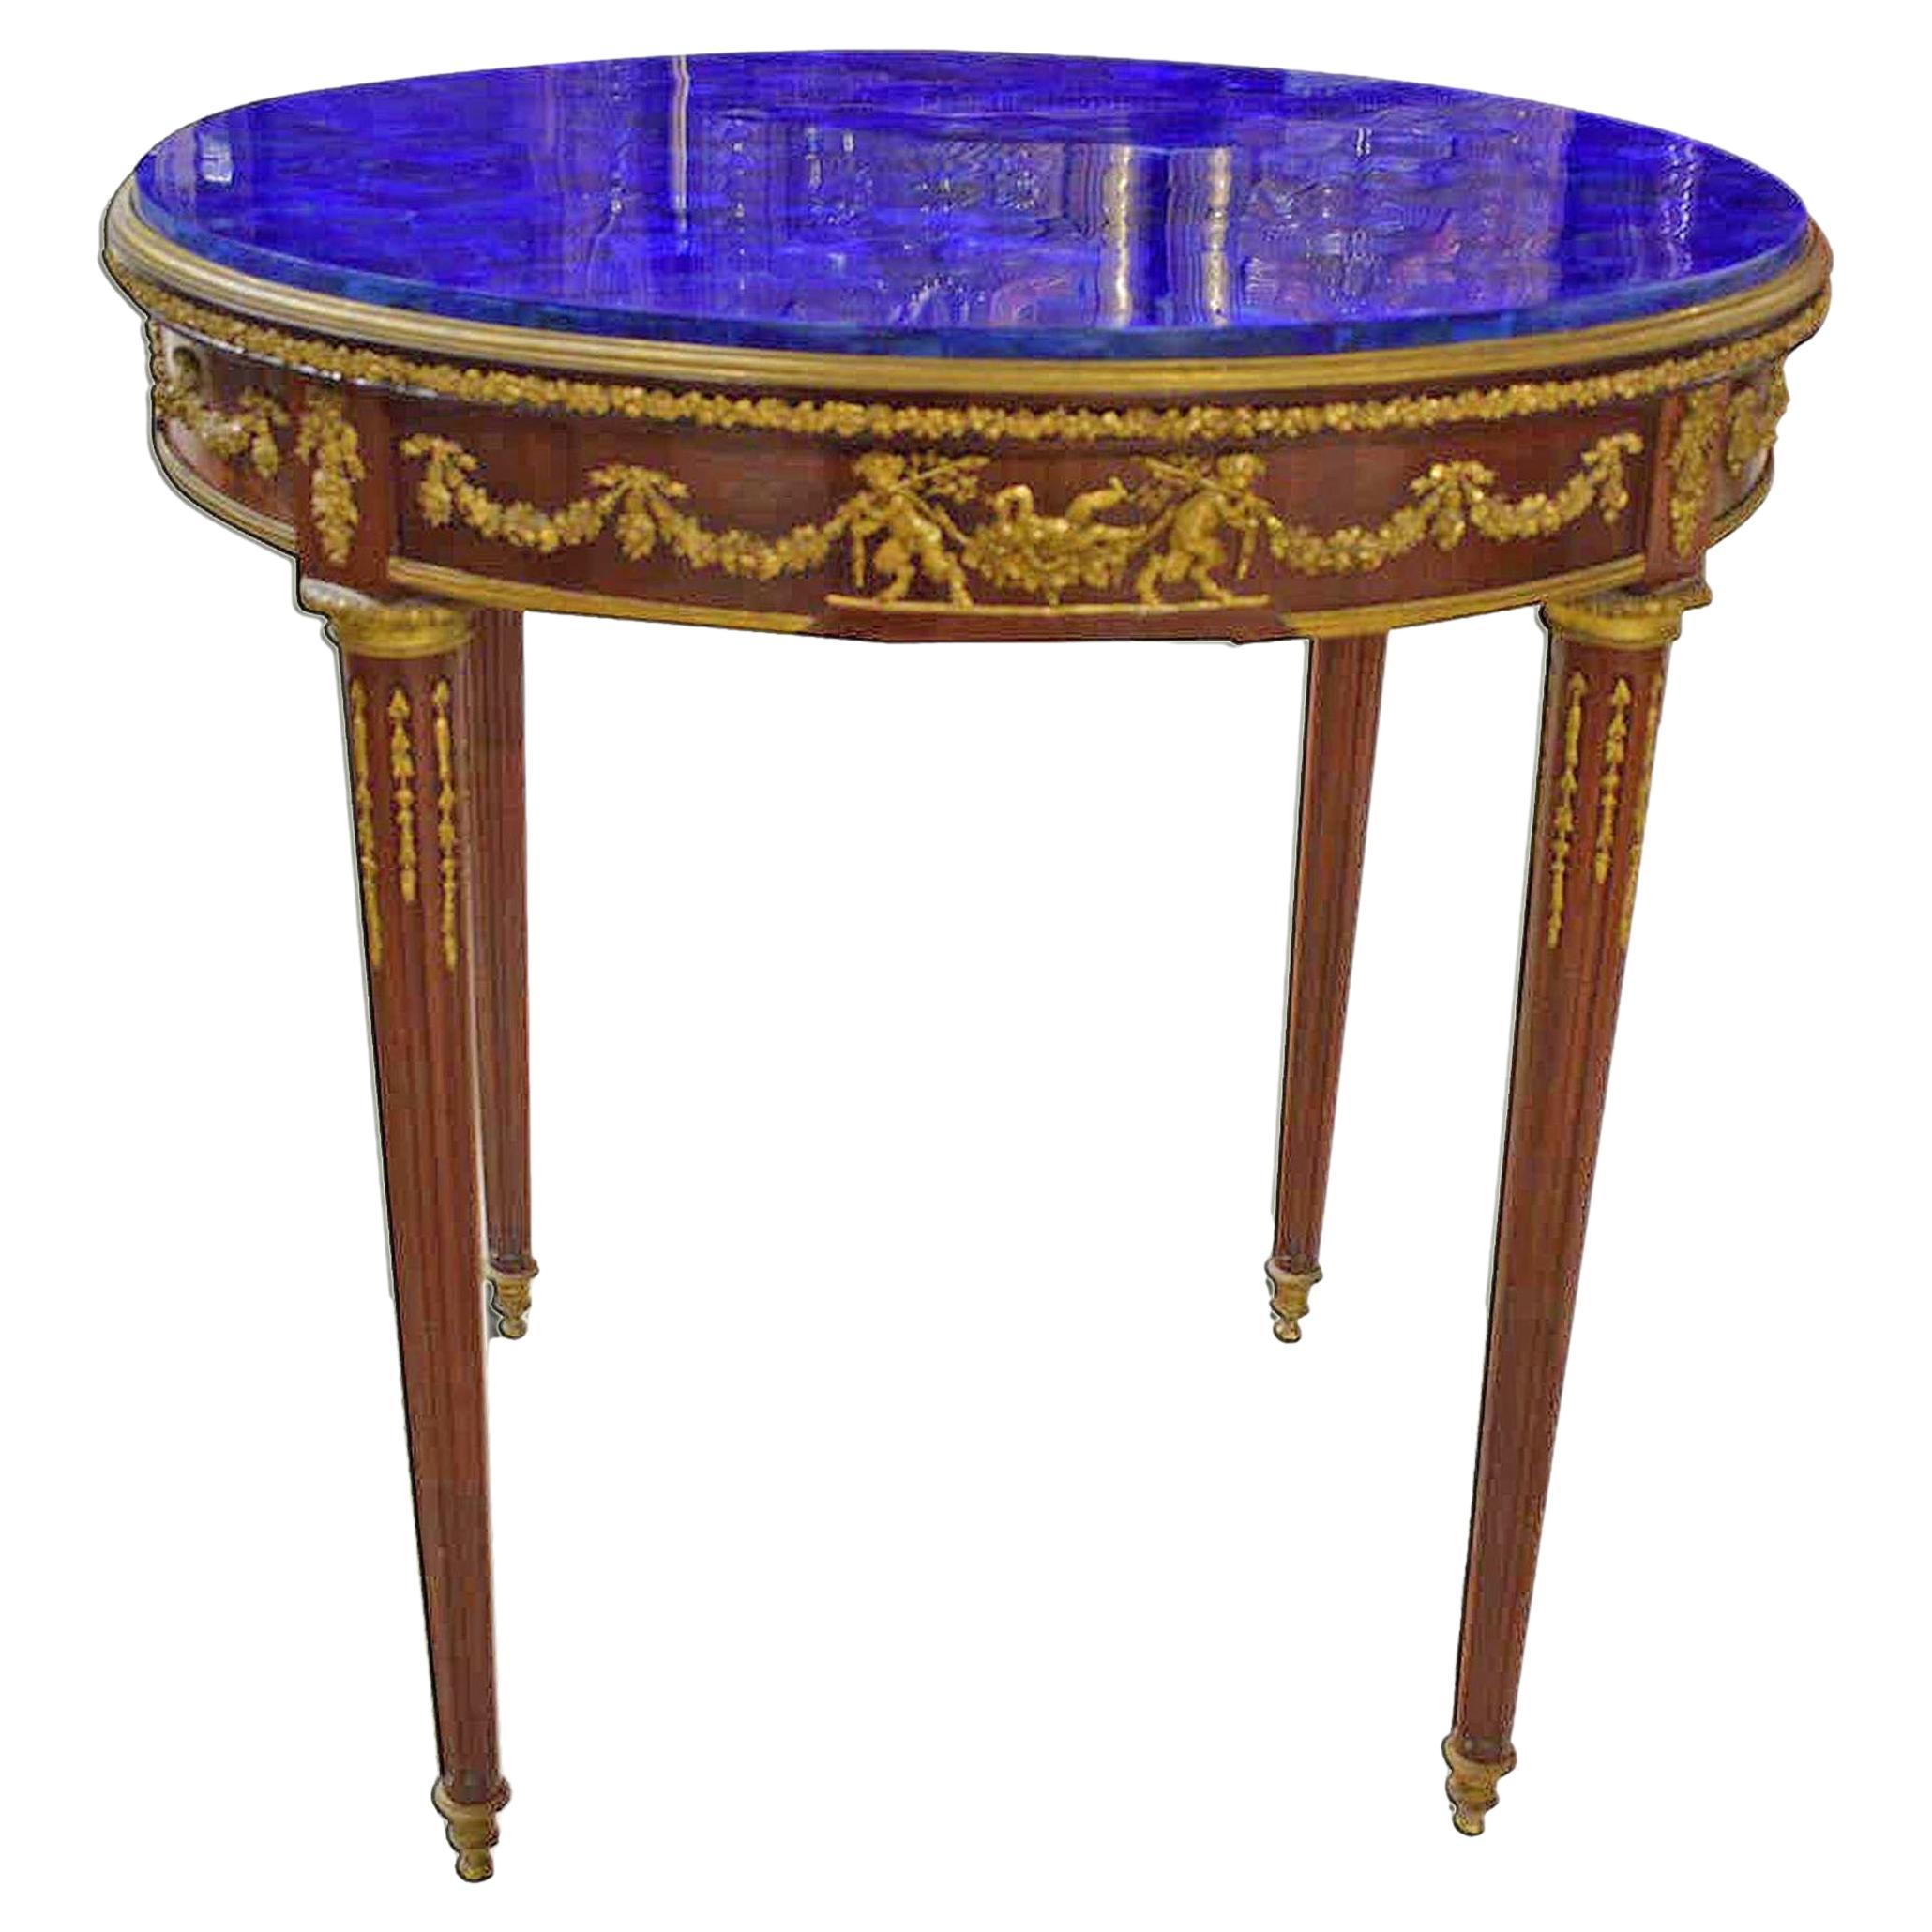 Details about   Marble Coffee Table Top Lapis Lazuli Stone Inlaid Side Table with Vintage Crafts 